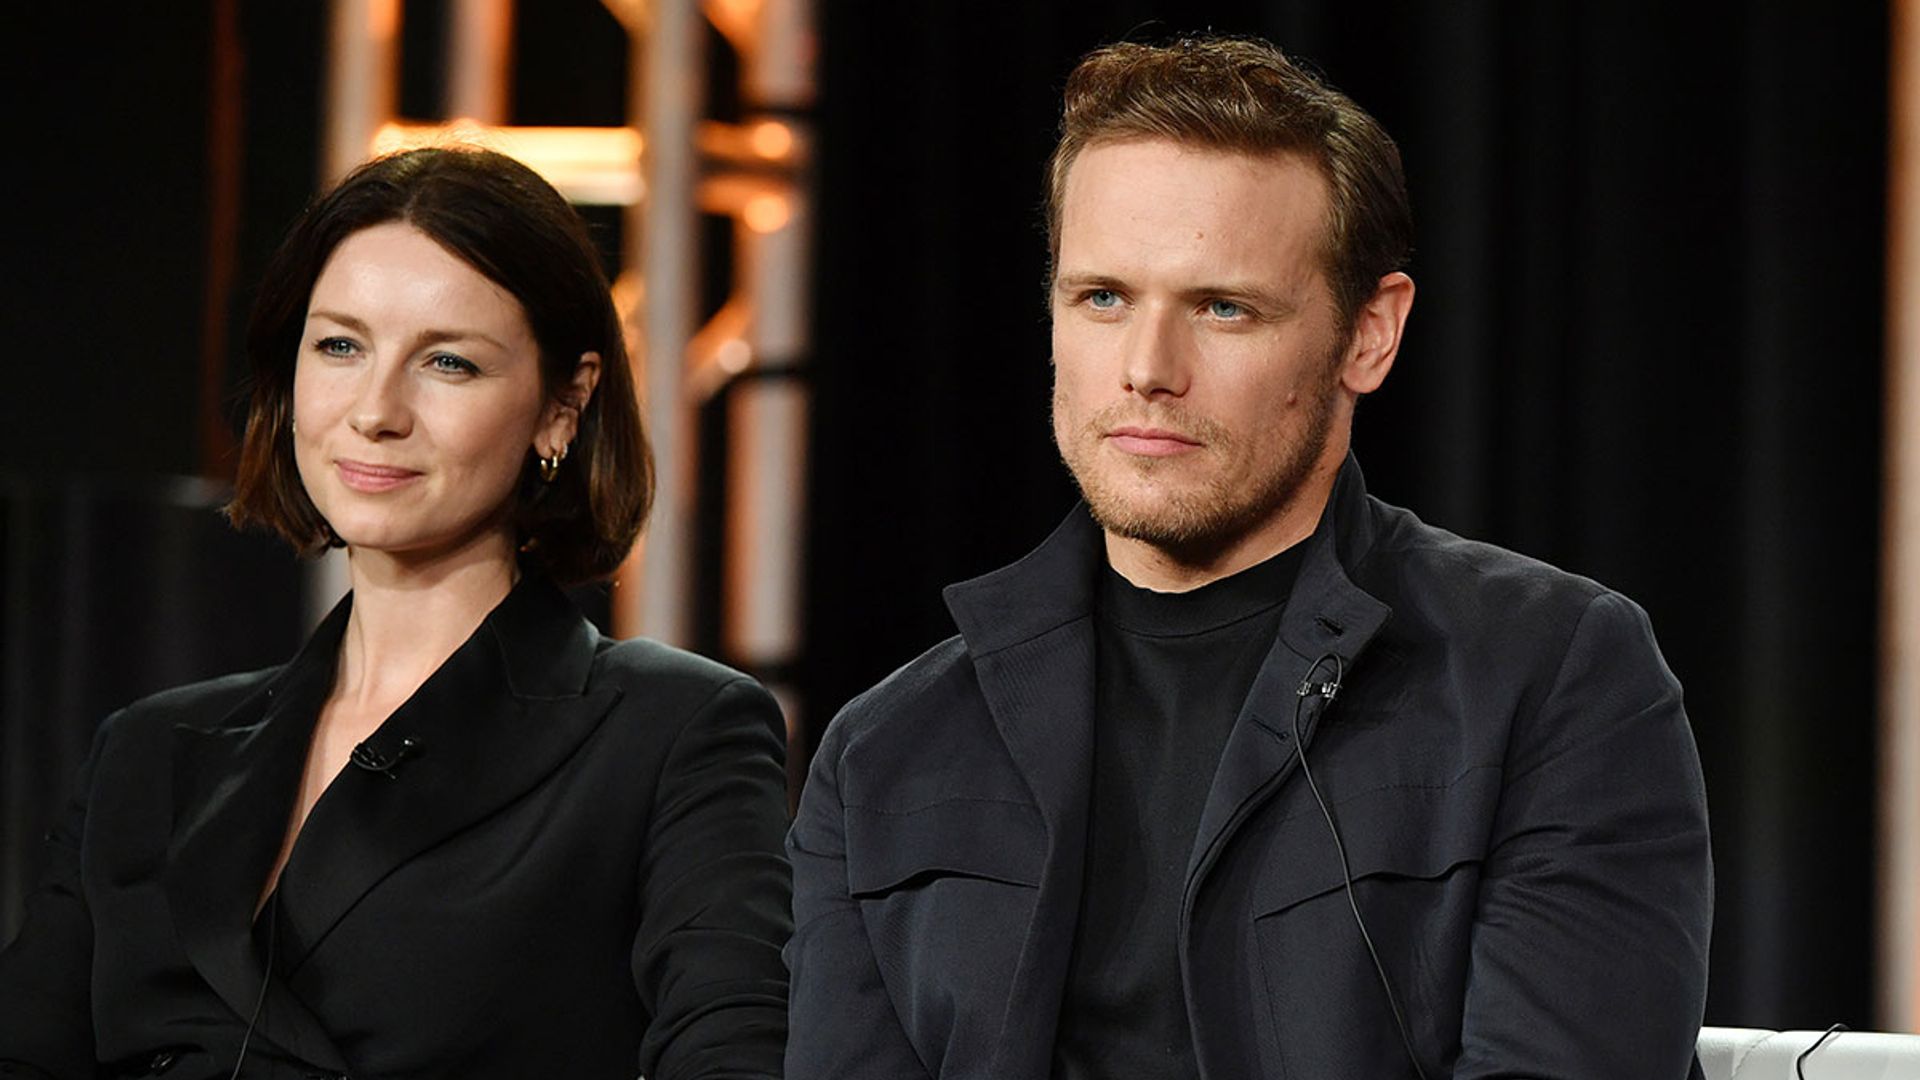 This is what Outlander's Caitríona Balfe has to say about those romance rumours with co-star Sam Heughan